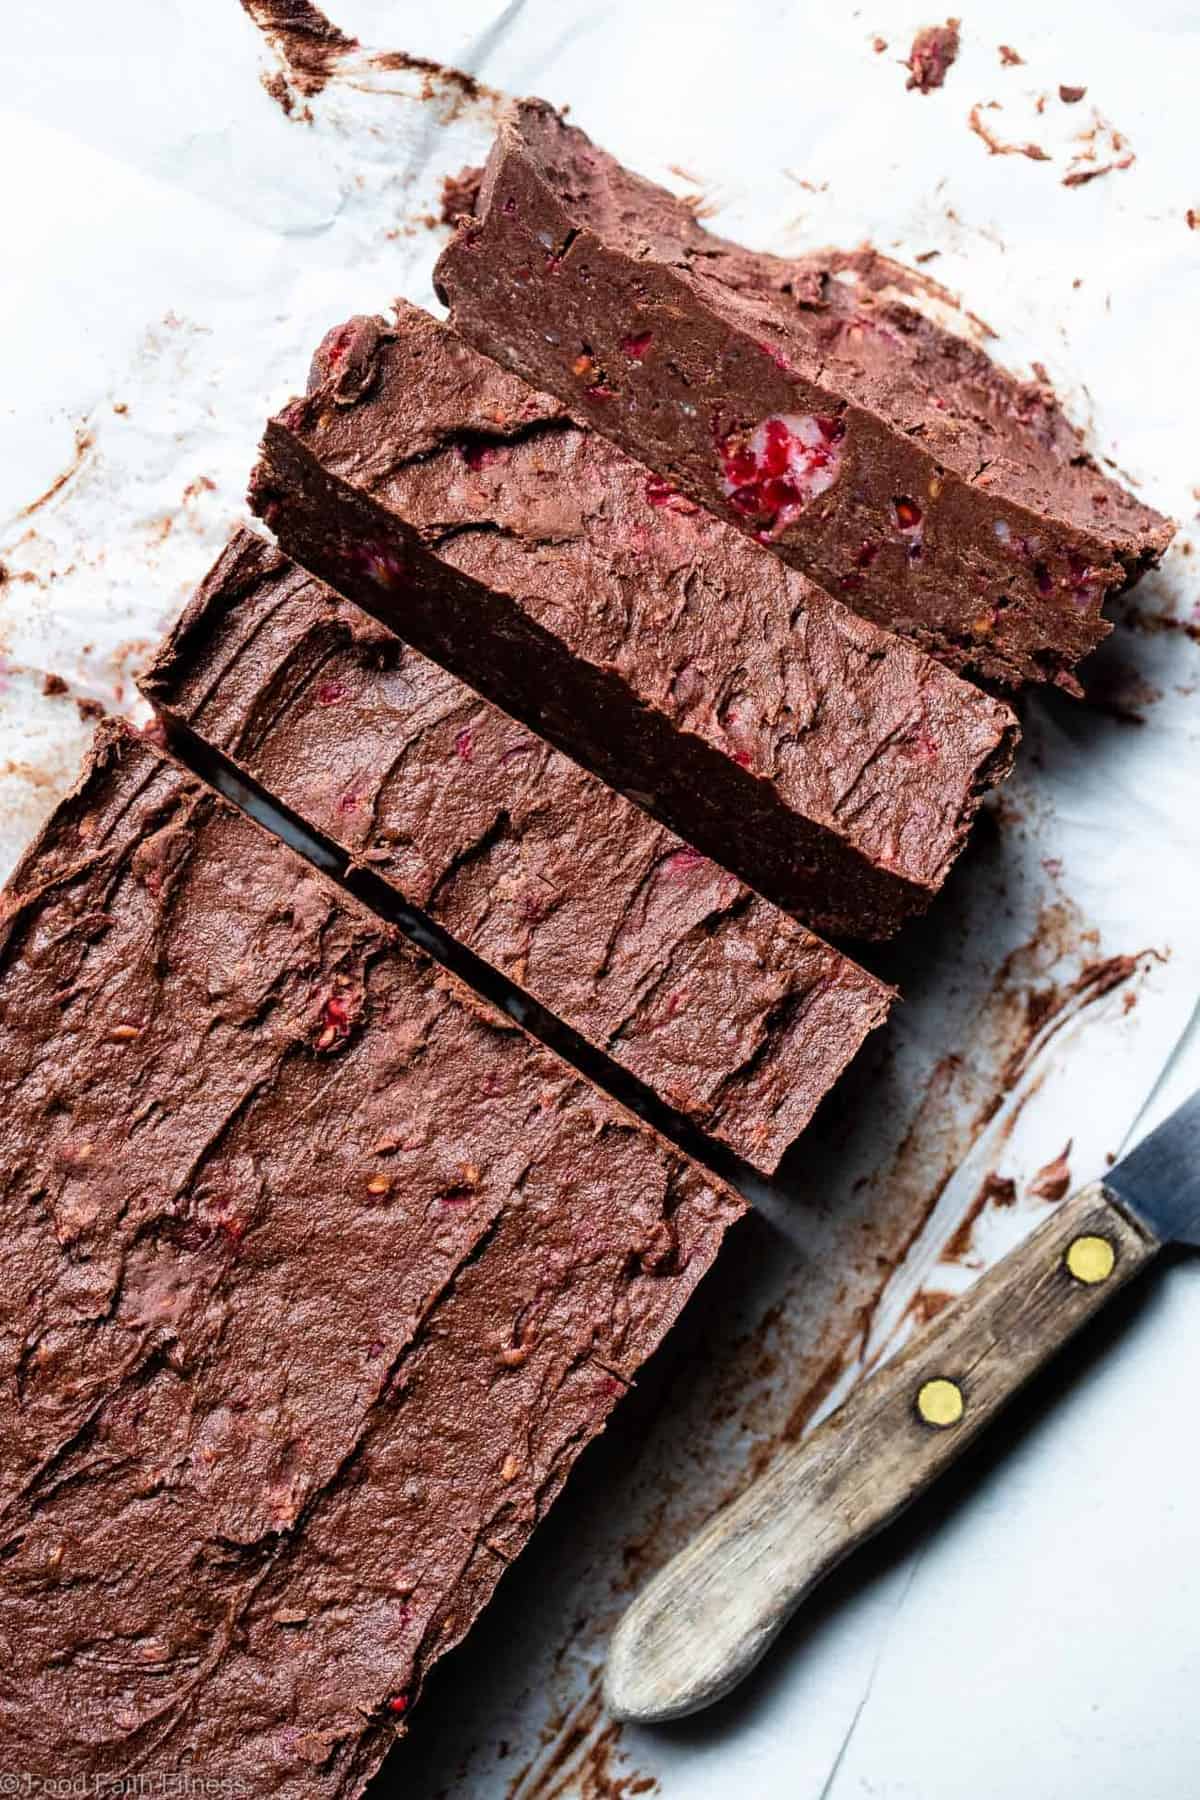 Chocolate Raspberry Paleo Coconut Oil Fudge Recipe - A quick and easy freezer healthy fudge recipe with no thermometer needed! Gluten free, dairy free, vegan friendly and only 5 ingredients too! | #Foodfaithfitness | 